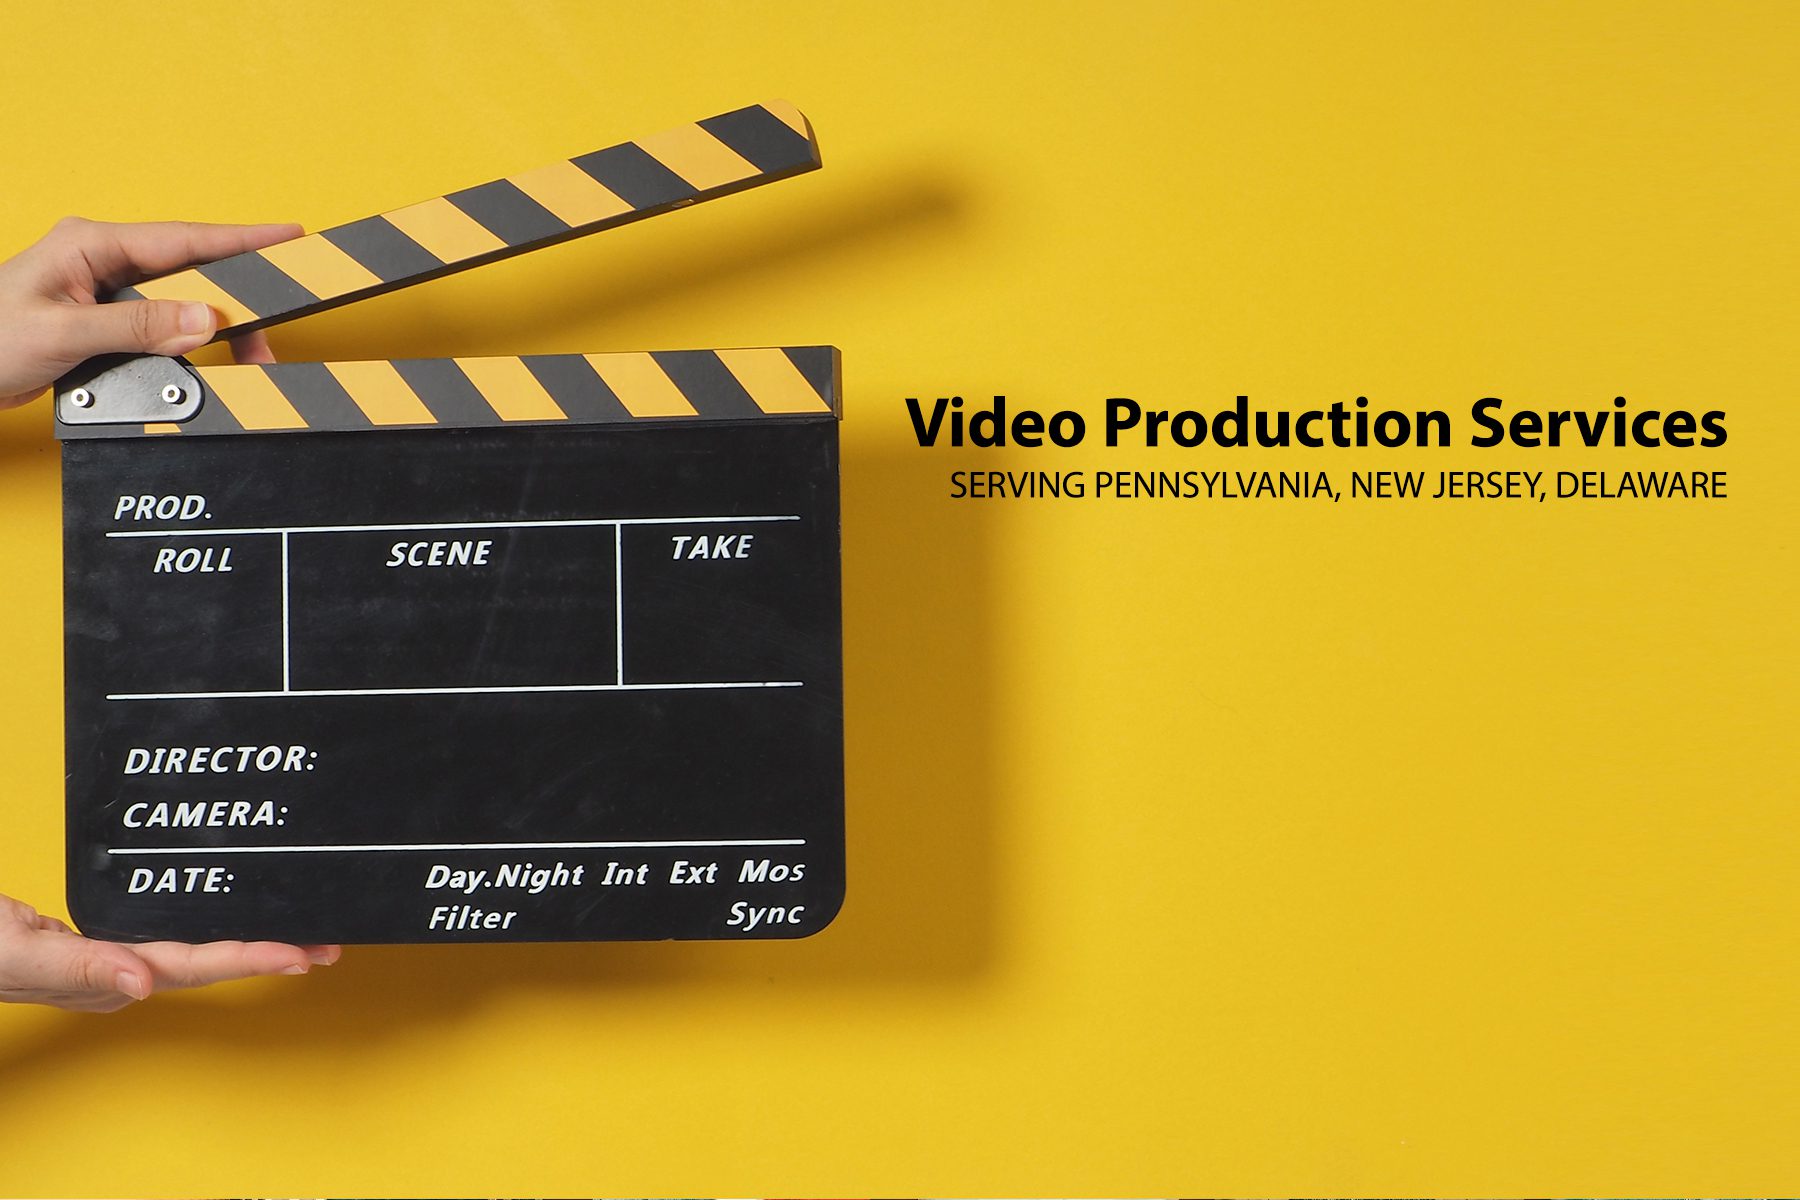 video production services, video production company, video production near me, corporate video production, pennsylvania, new jersey, delaware